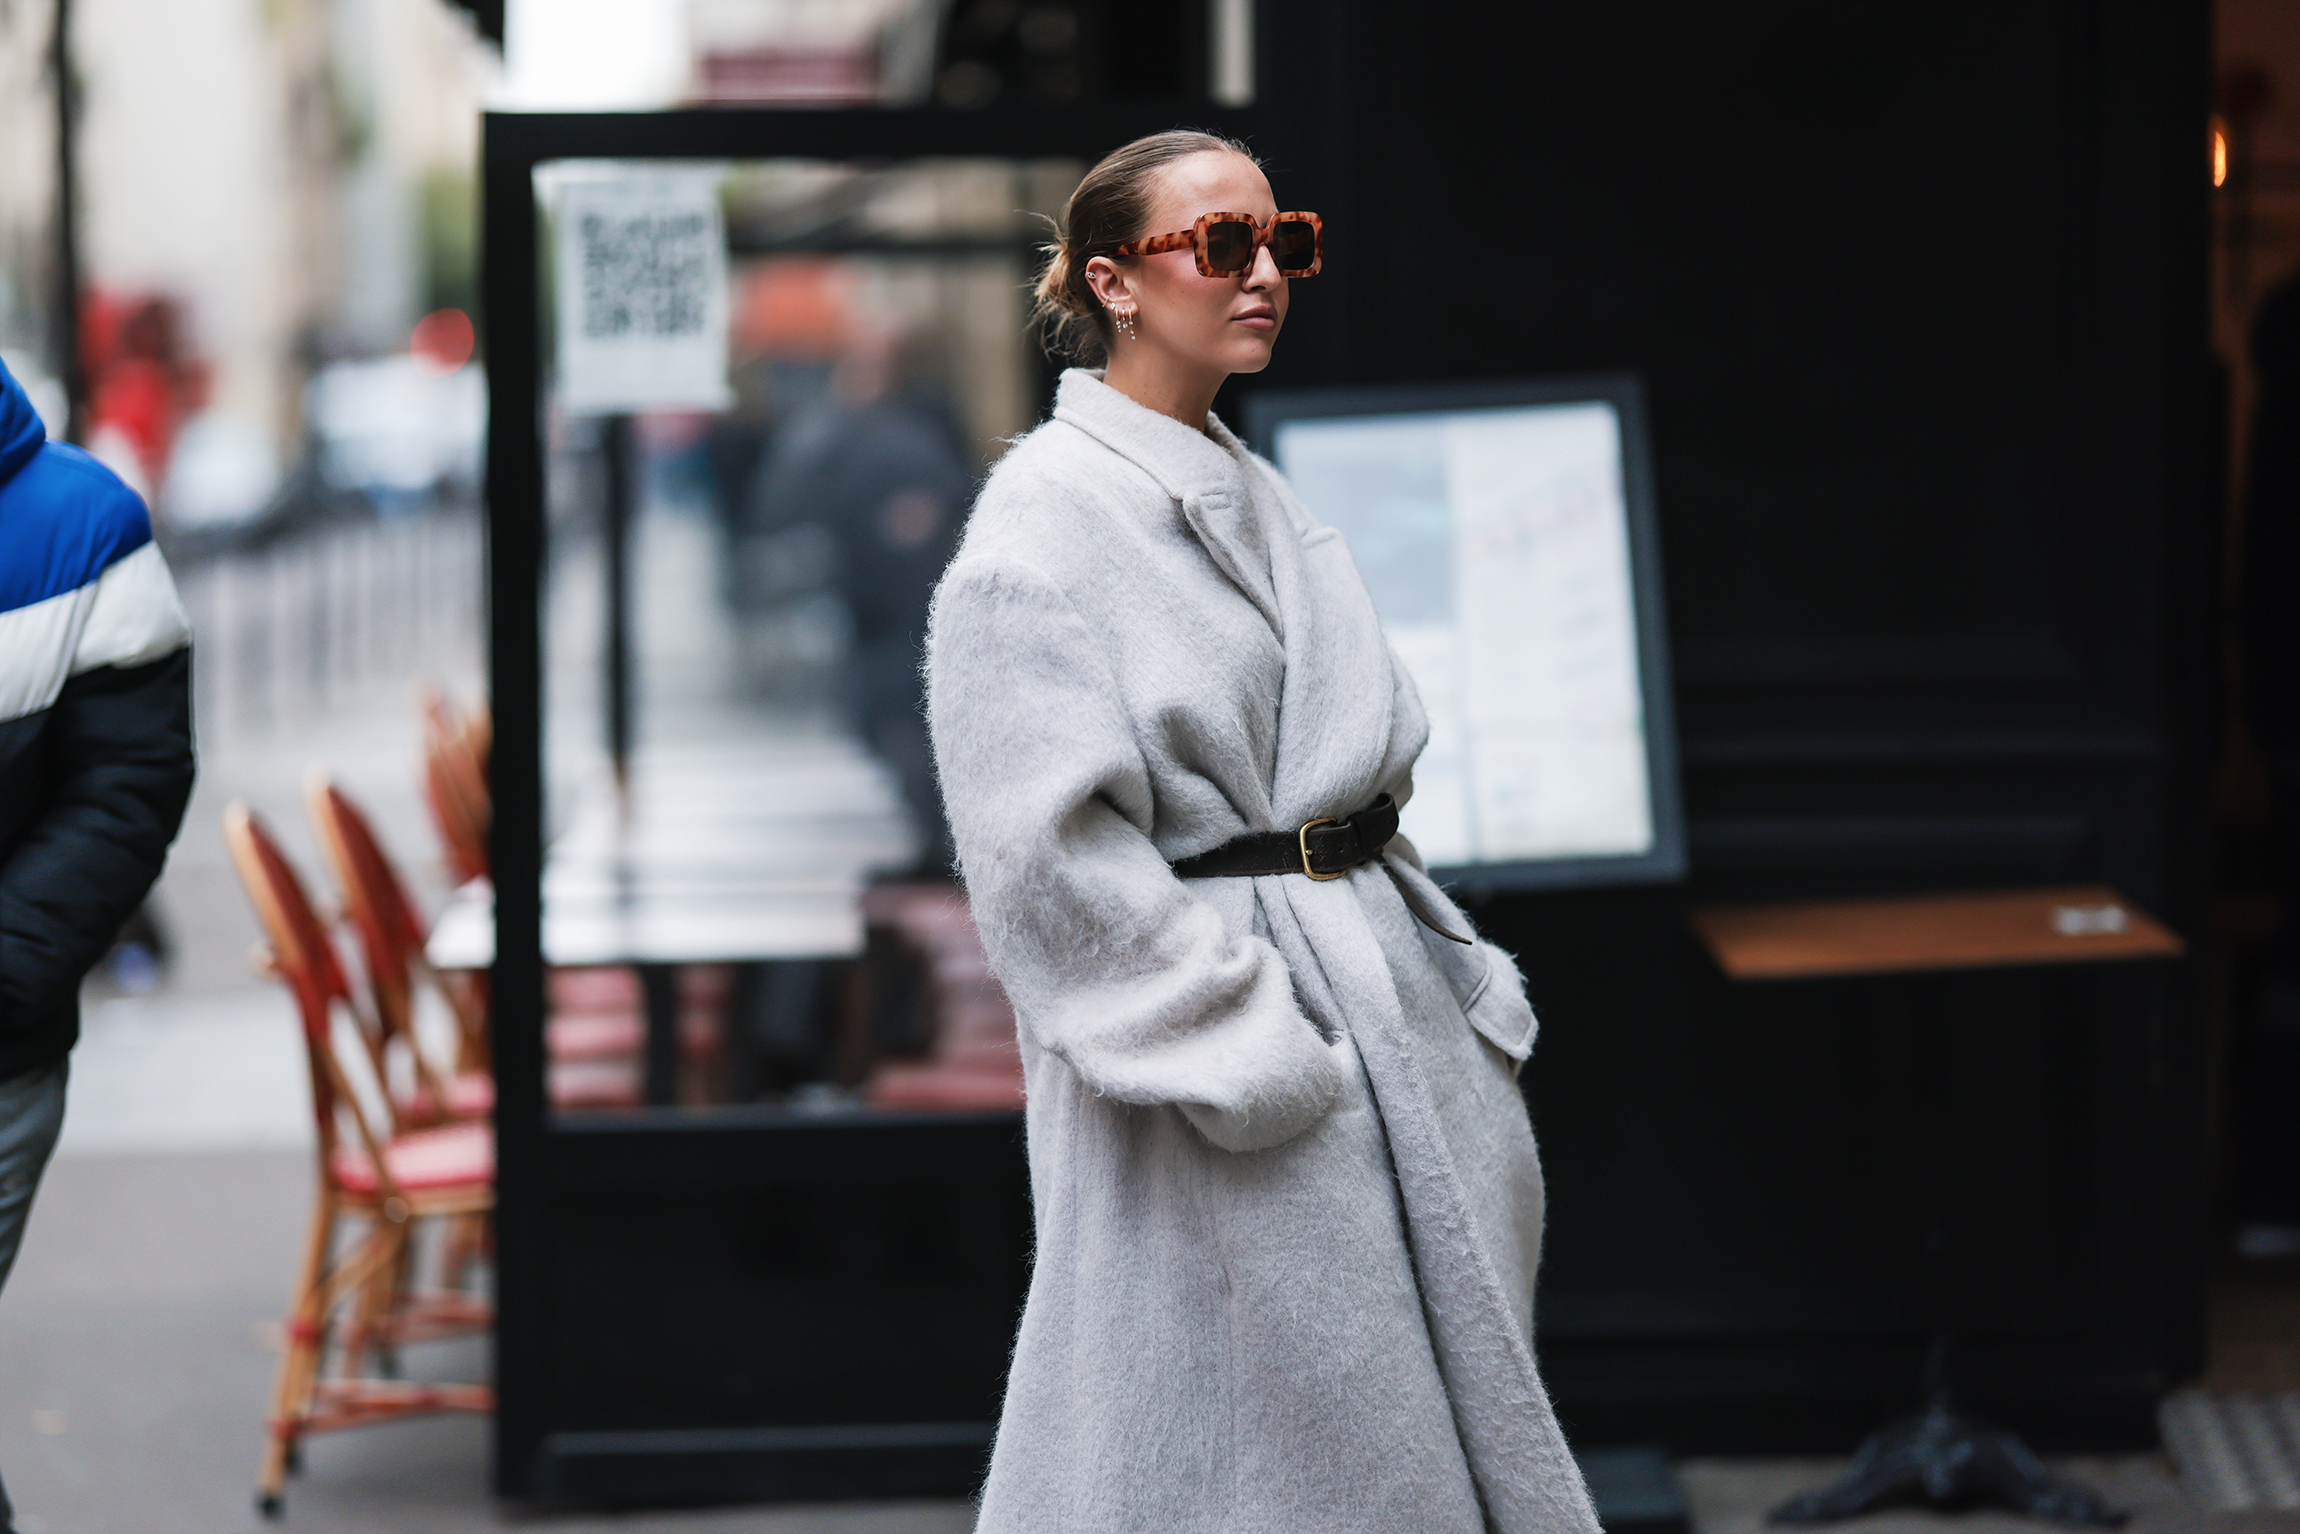 These 14 Perfect Wrap Coats Are Giving Total I-Run-This Energy